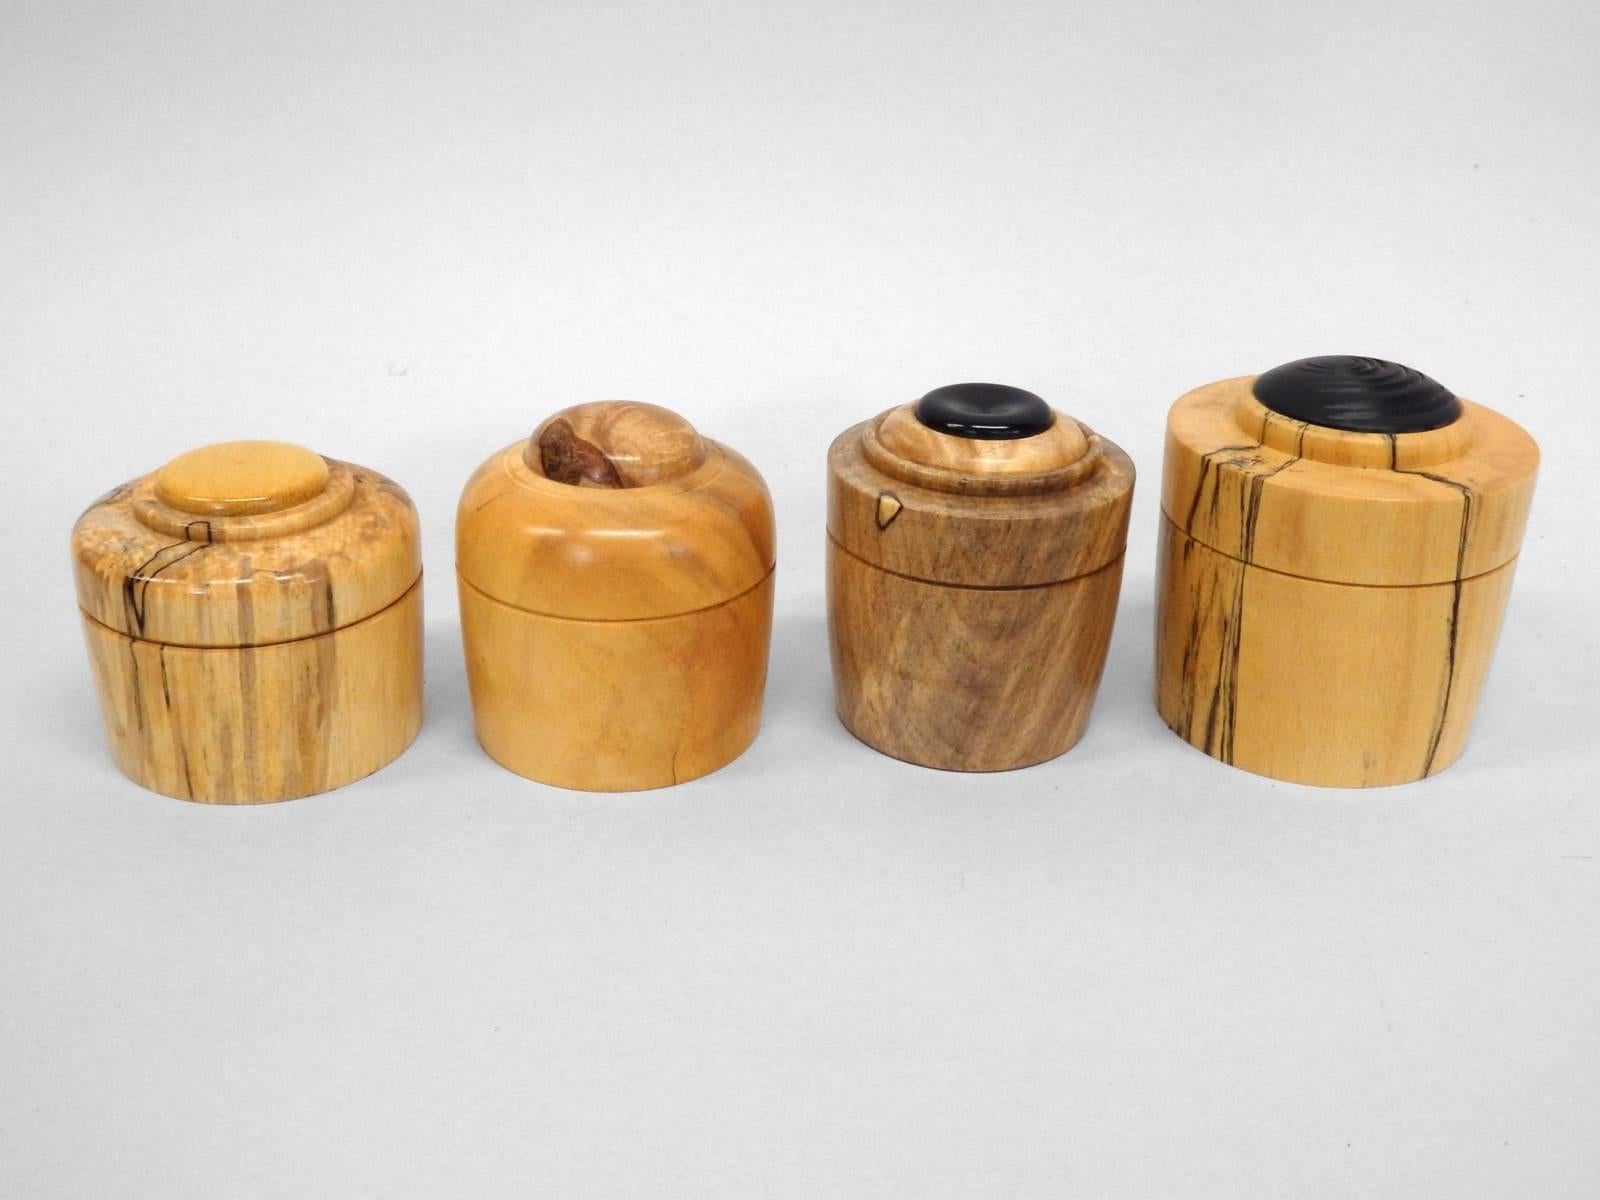 Four studio turned wood gift canisters by Steve Sharpe.